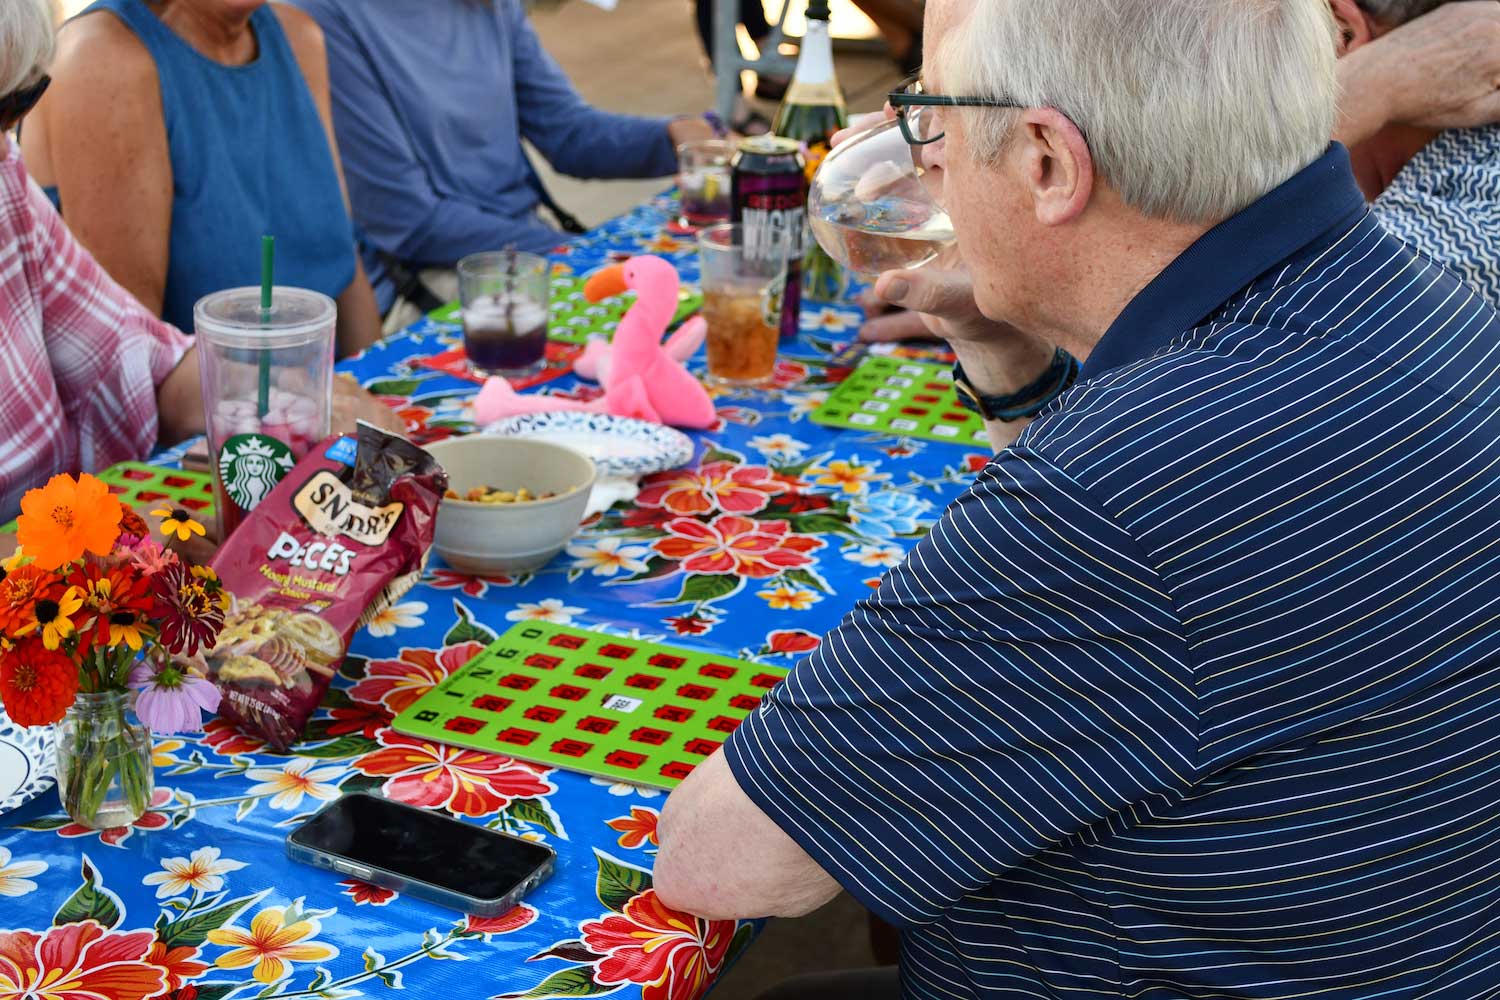 A group sitting around a picnic table enjoying drinks and food while playing bingo.